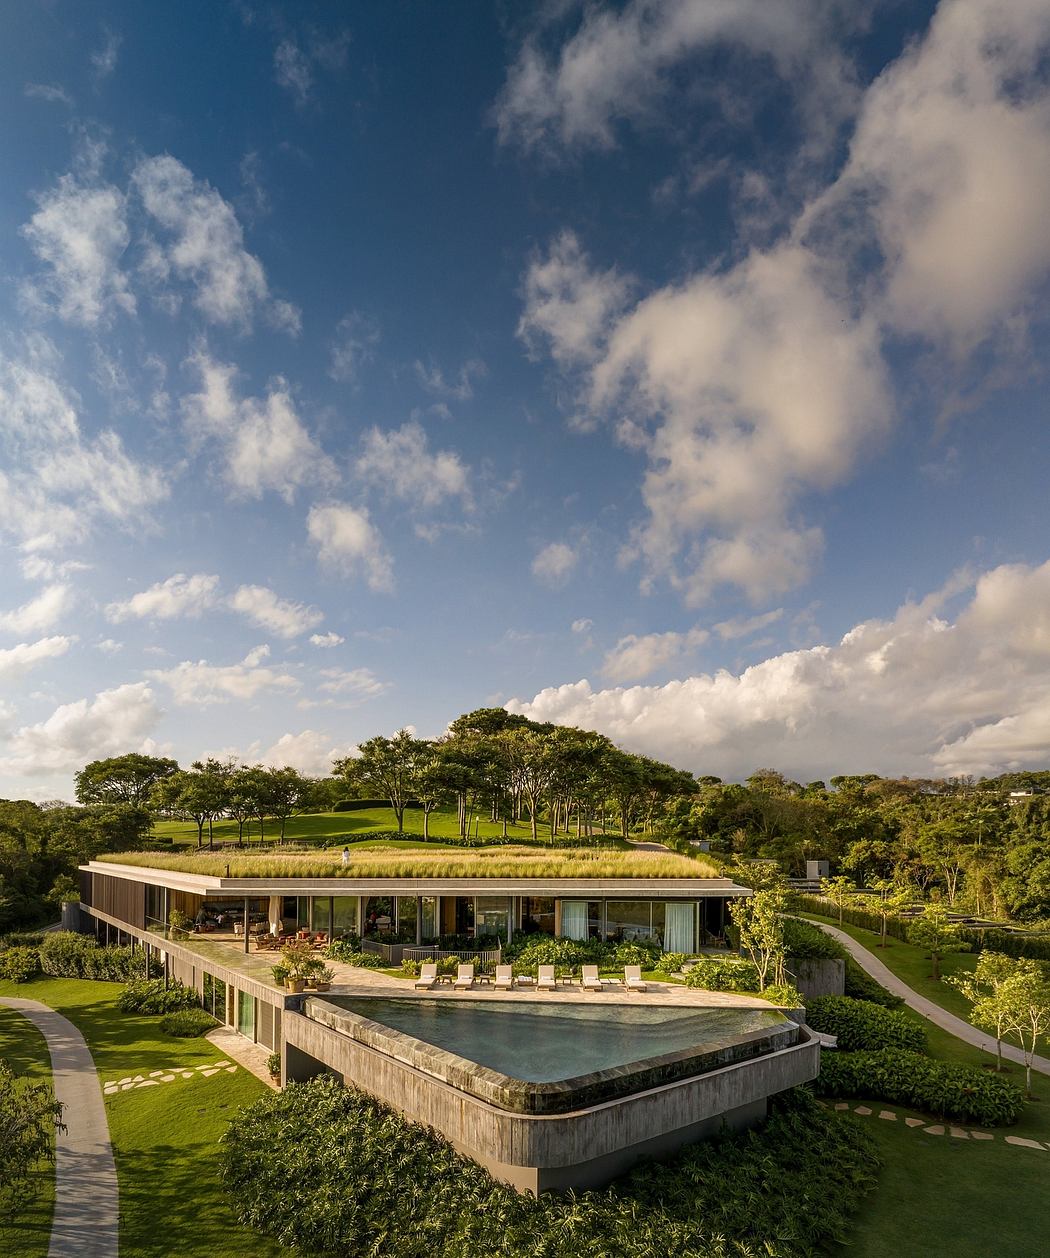 Casa Gak: Embracing Nature with Innovative Architecture